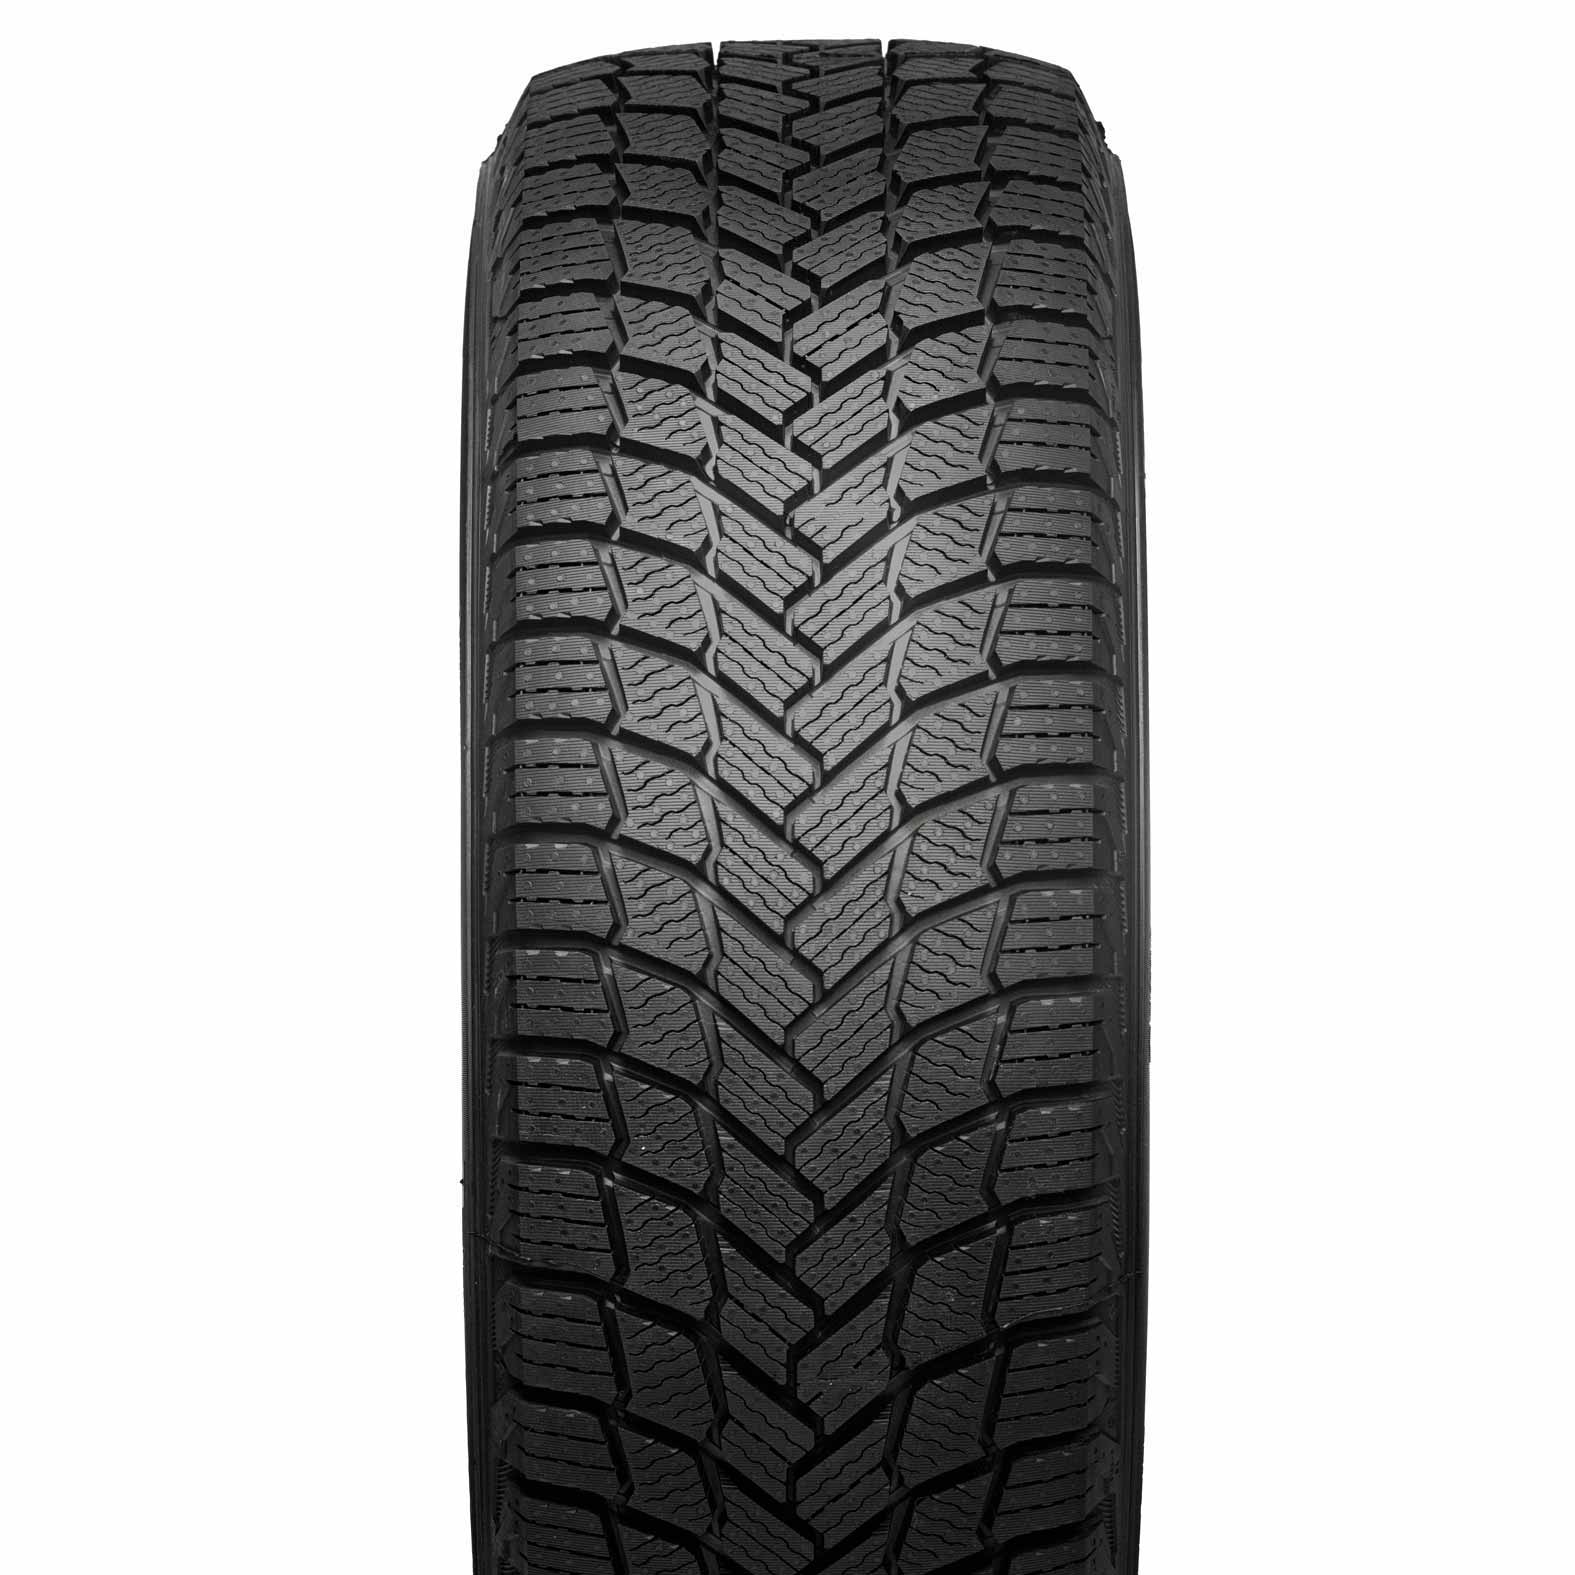 for | Michelin Winter Snow X-Ice Tire Kal Tire